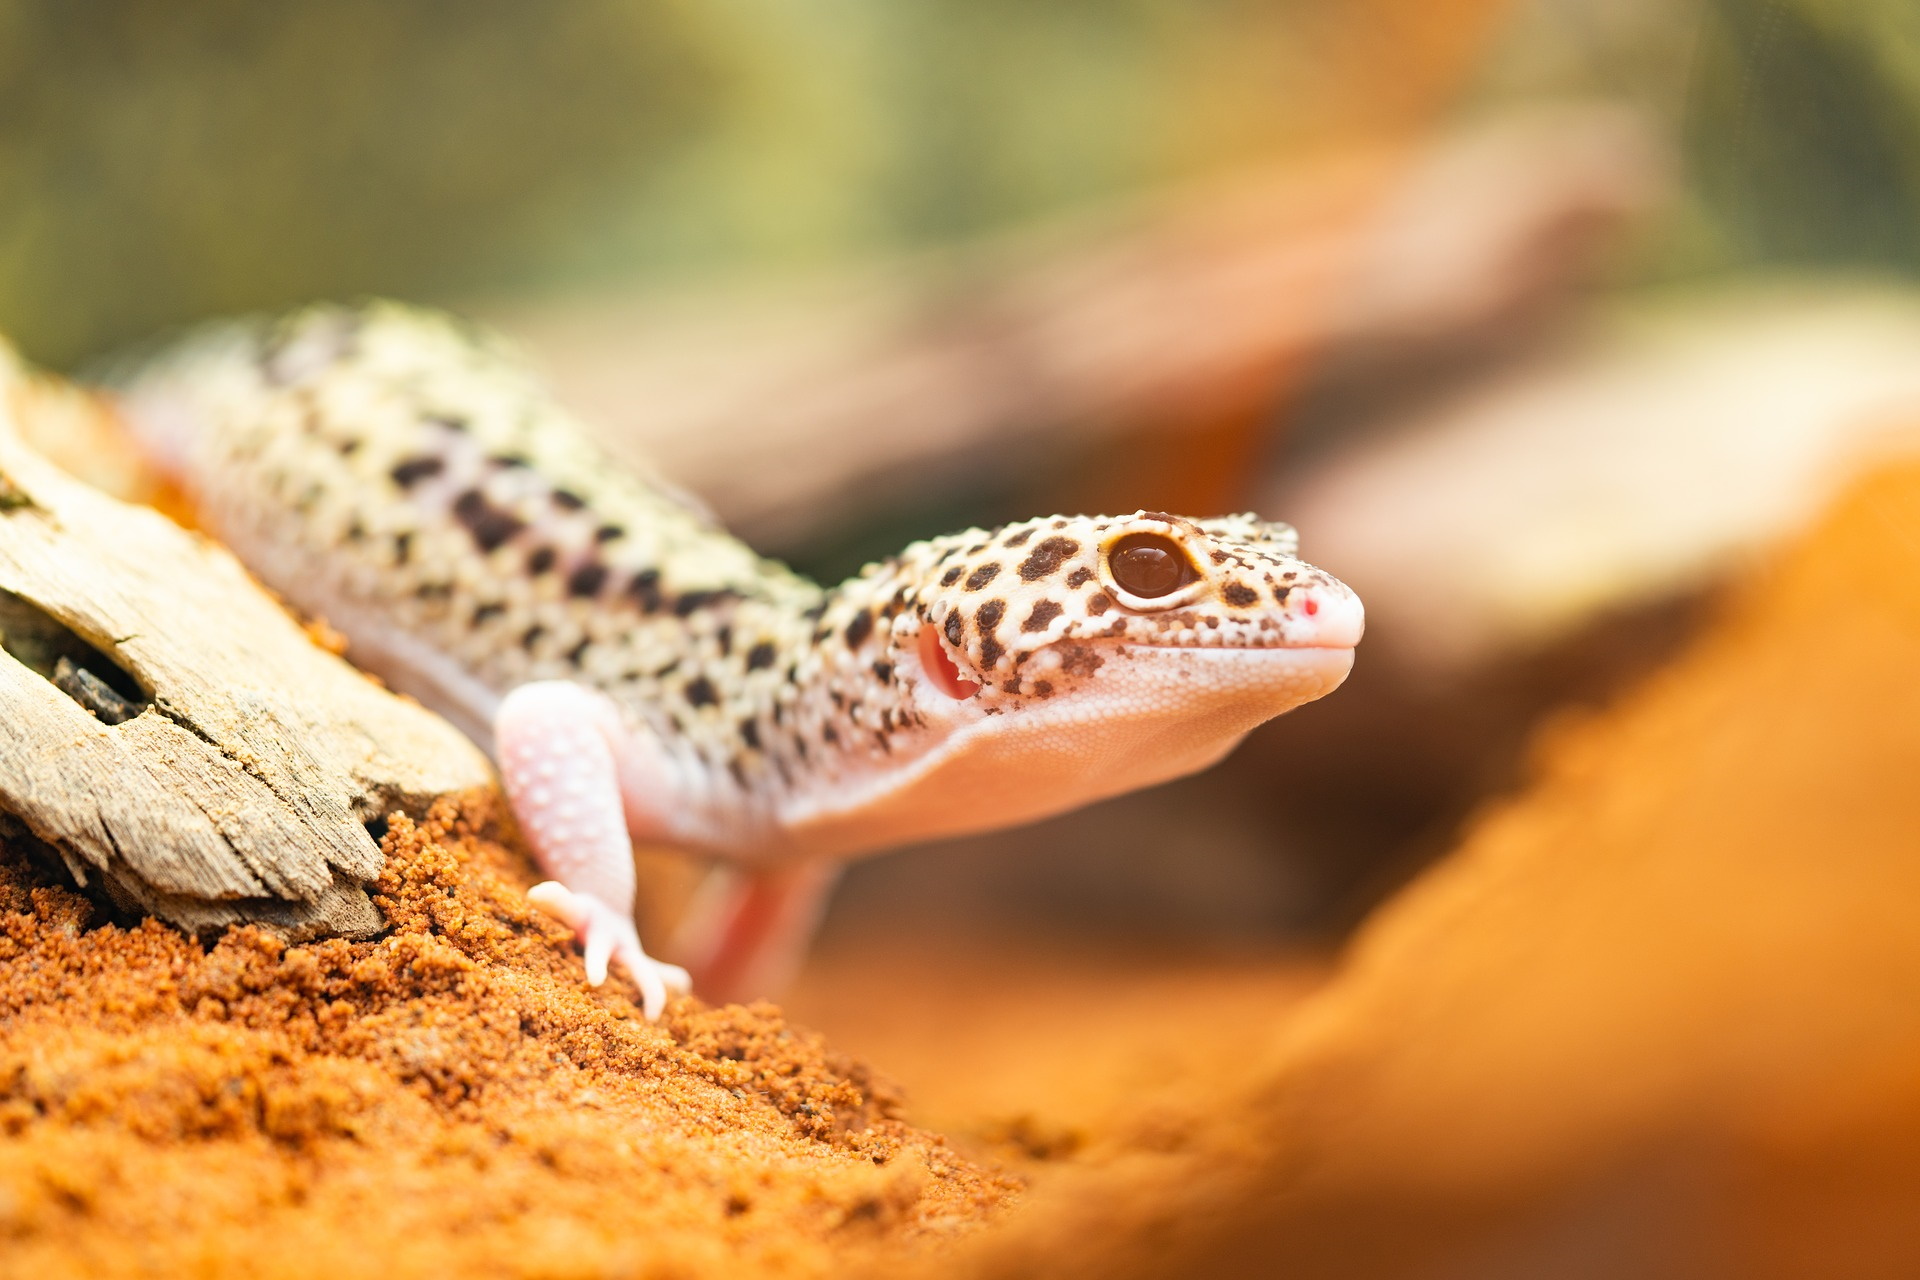 10 Awesome Leopard Gecko Facts You Might Not Know!